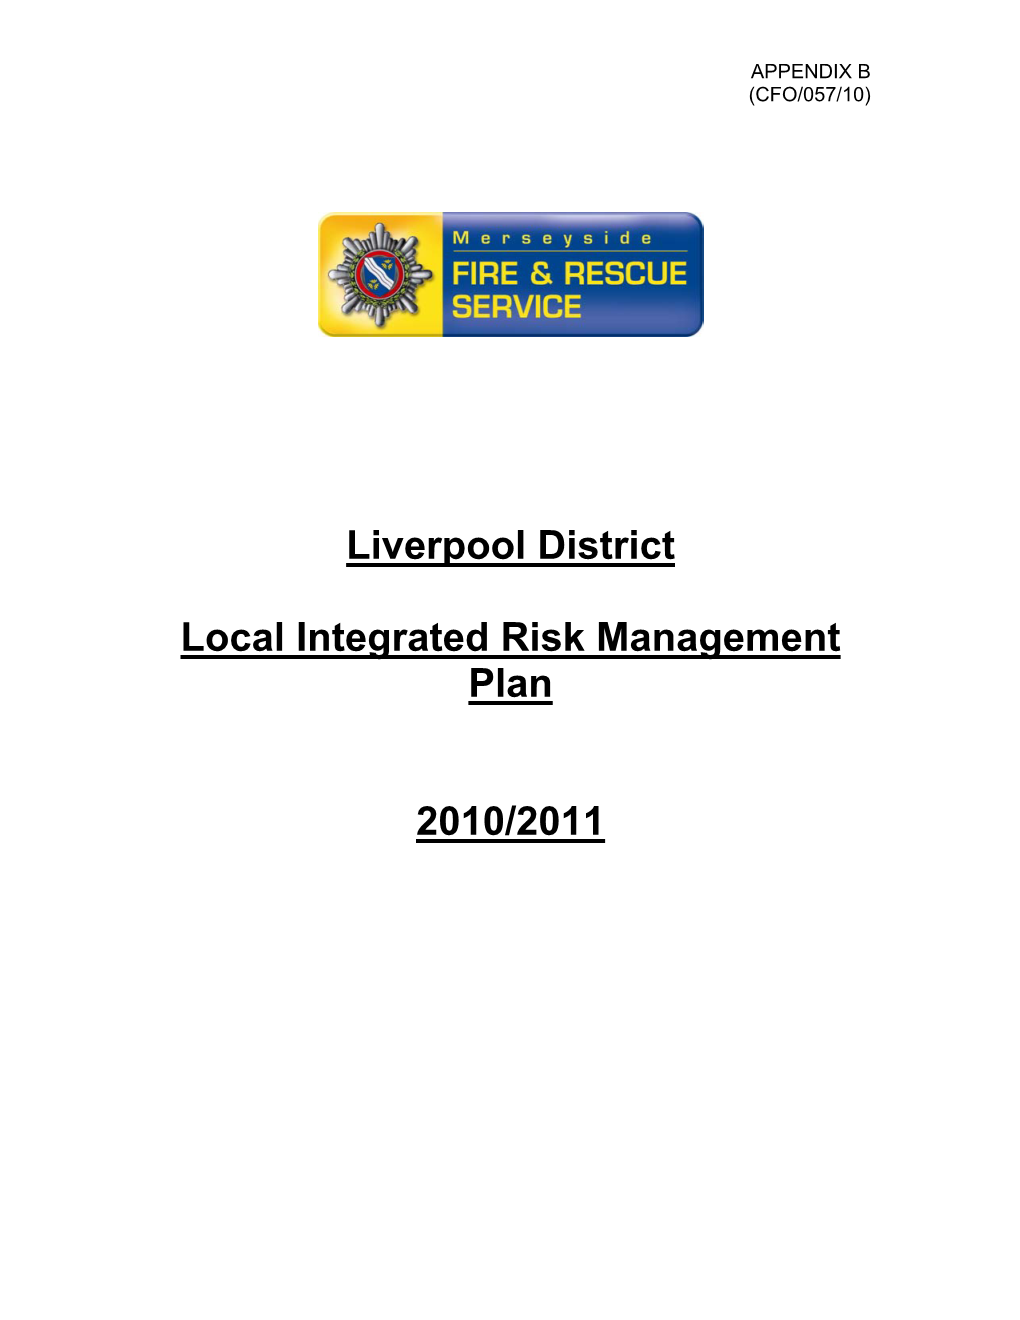 Liverpool District Local Integrated Risk Management Plan 2010/2011